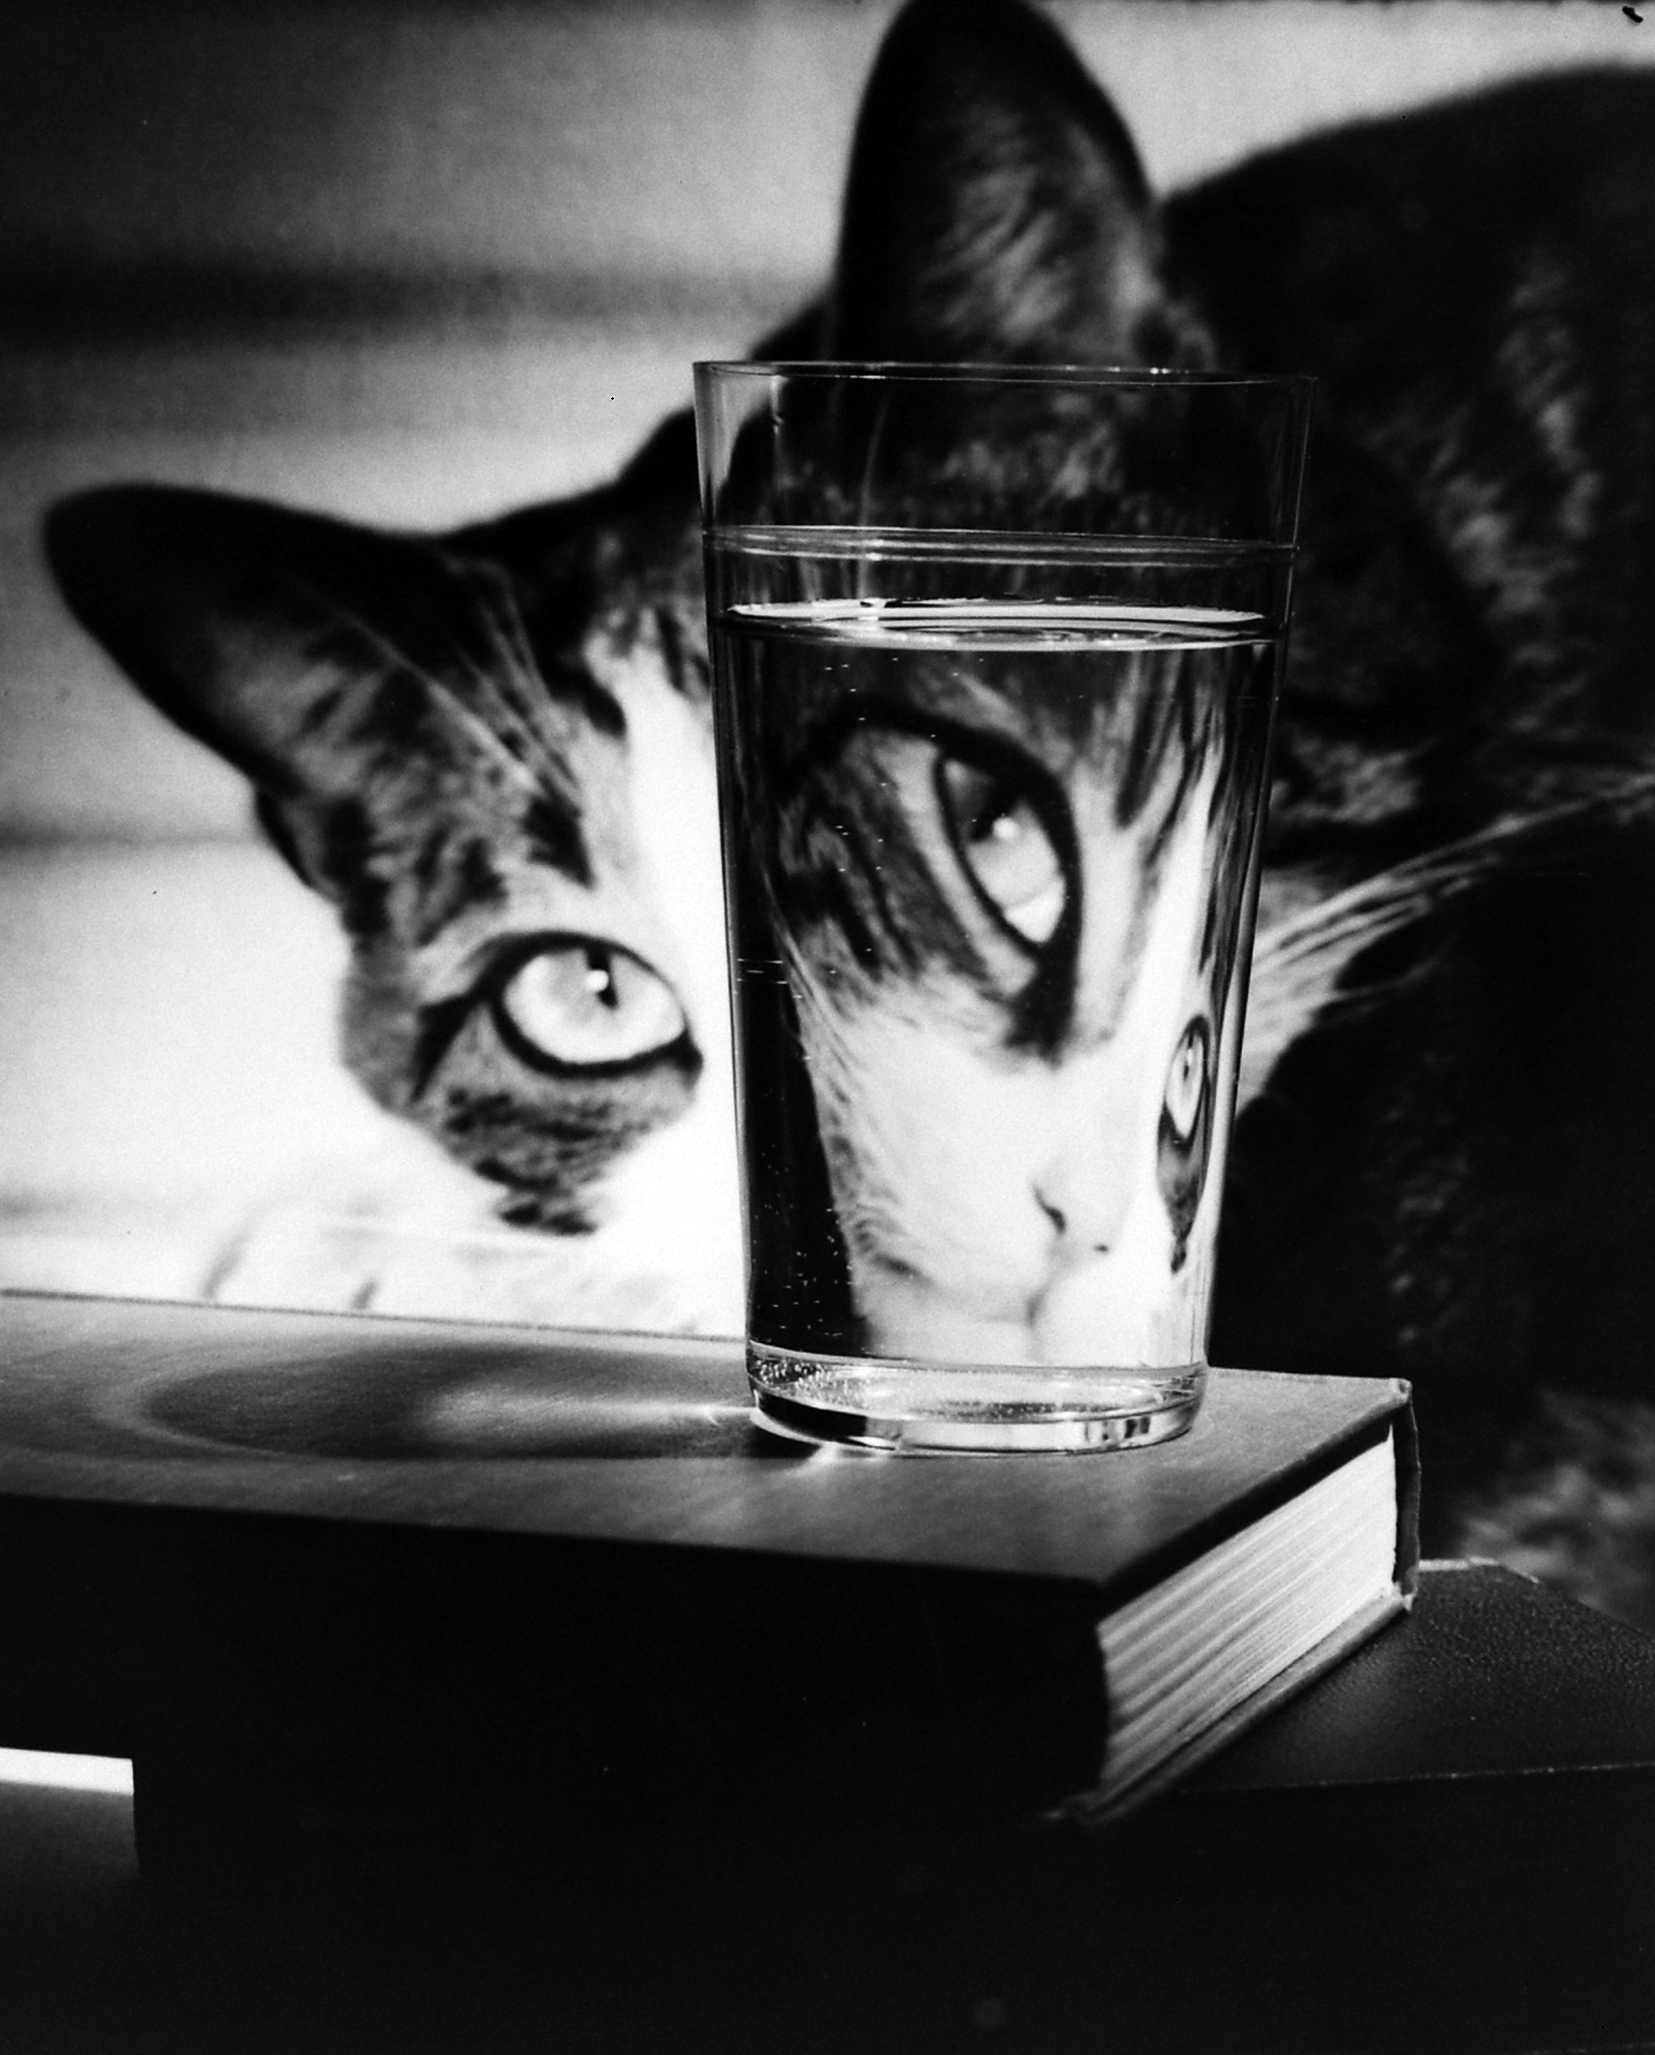 Manipulation of light to create emotive and visual effects with a cat, 1963.